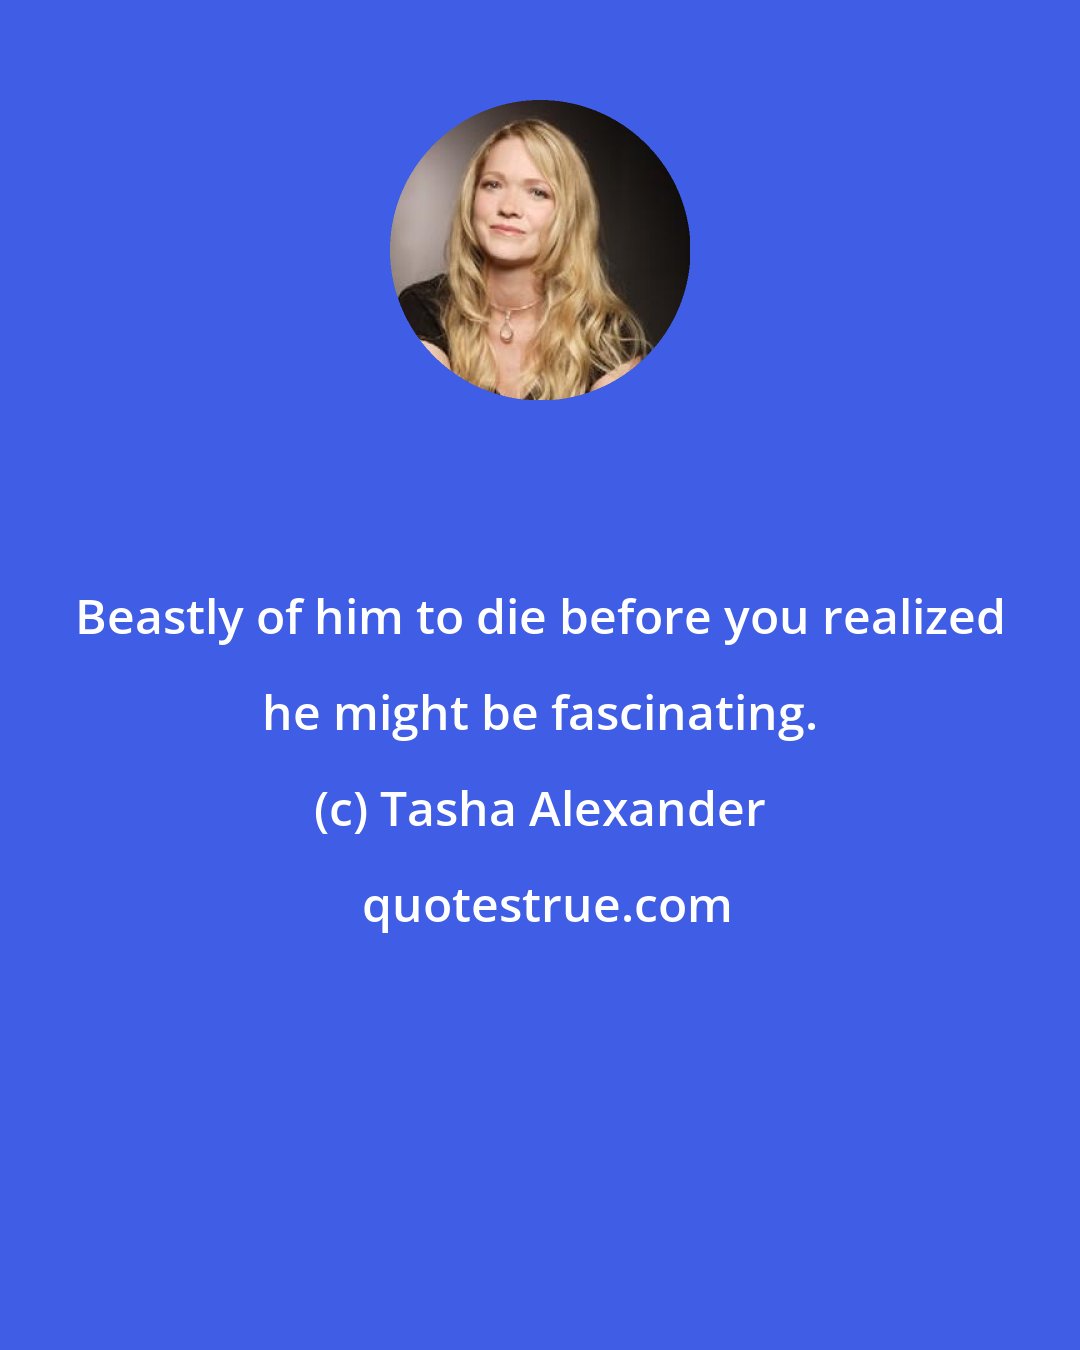 Tasha Alexander: Beastly of him to die before you realized he might be fascinating.